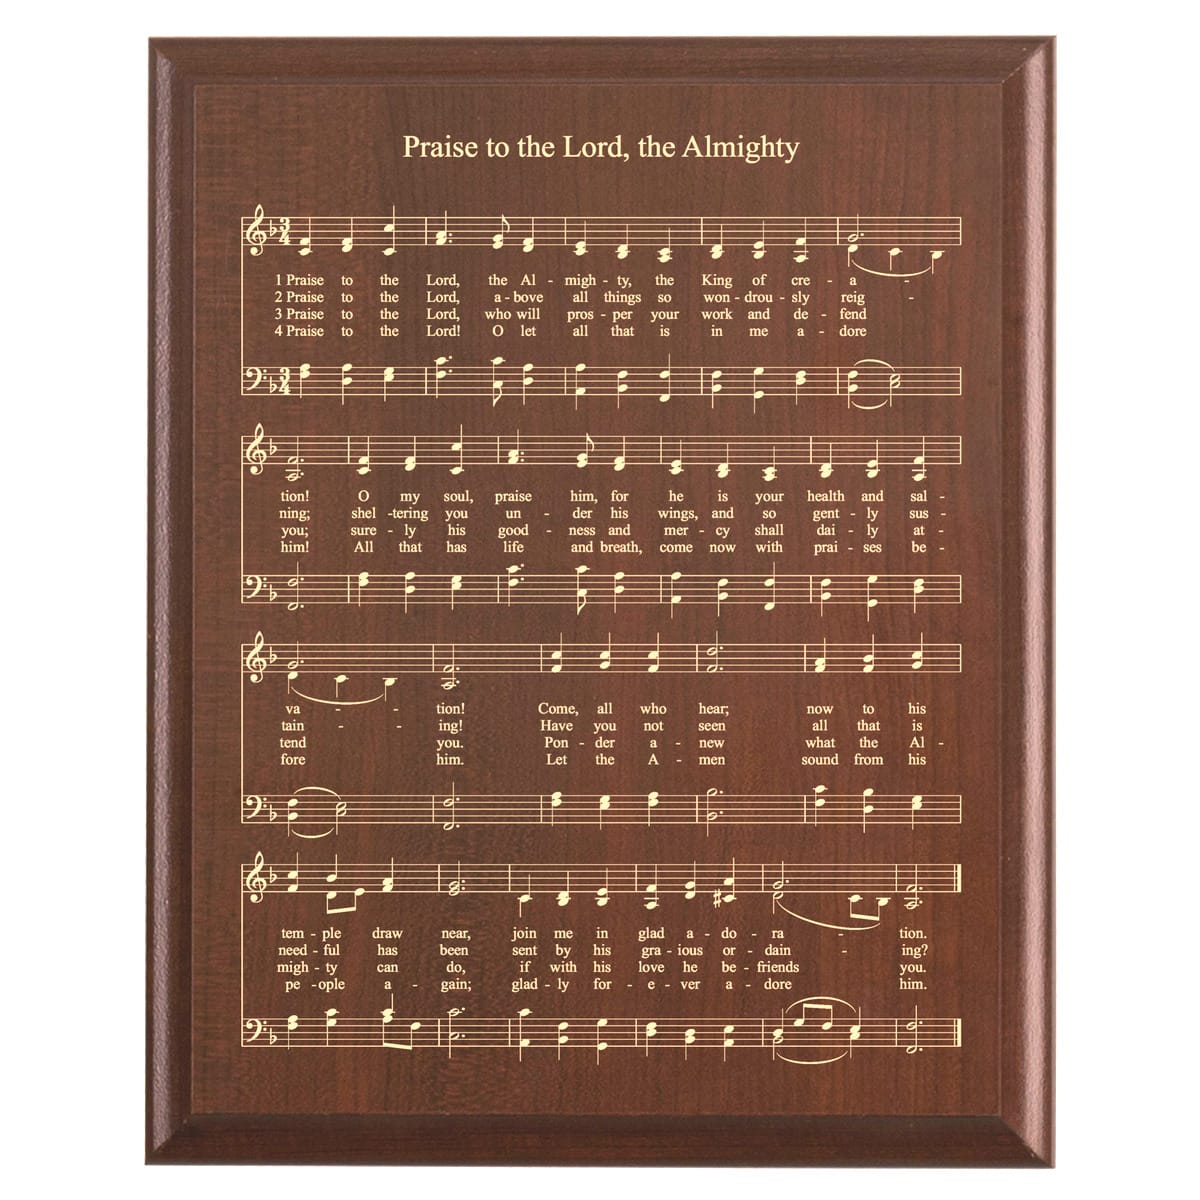 Plaque photo: Praise To the Lord The Almighty Hymn Plaque design with free personalization. Wood style finish with customized text.